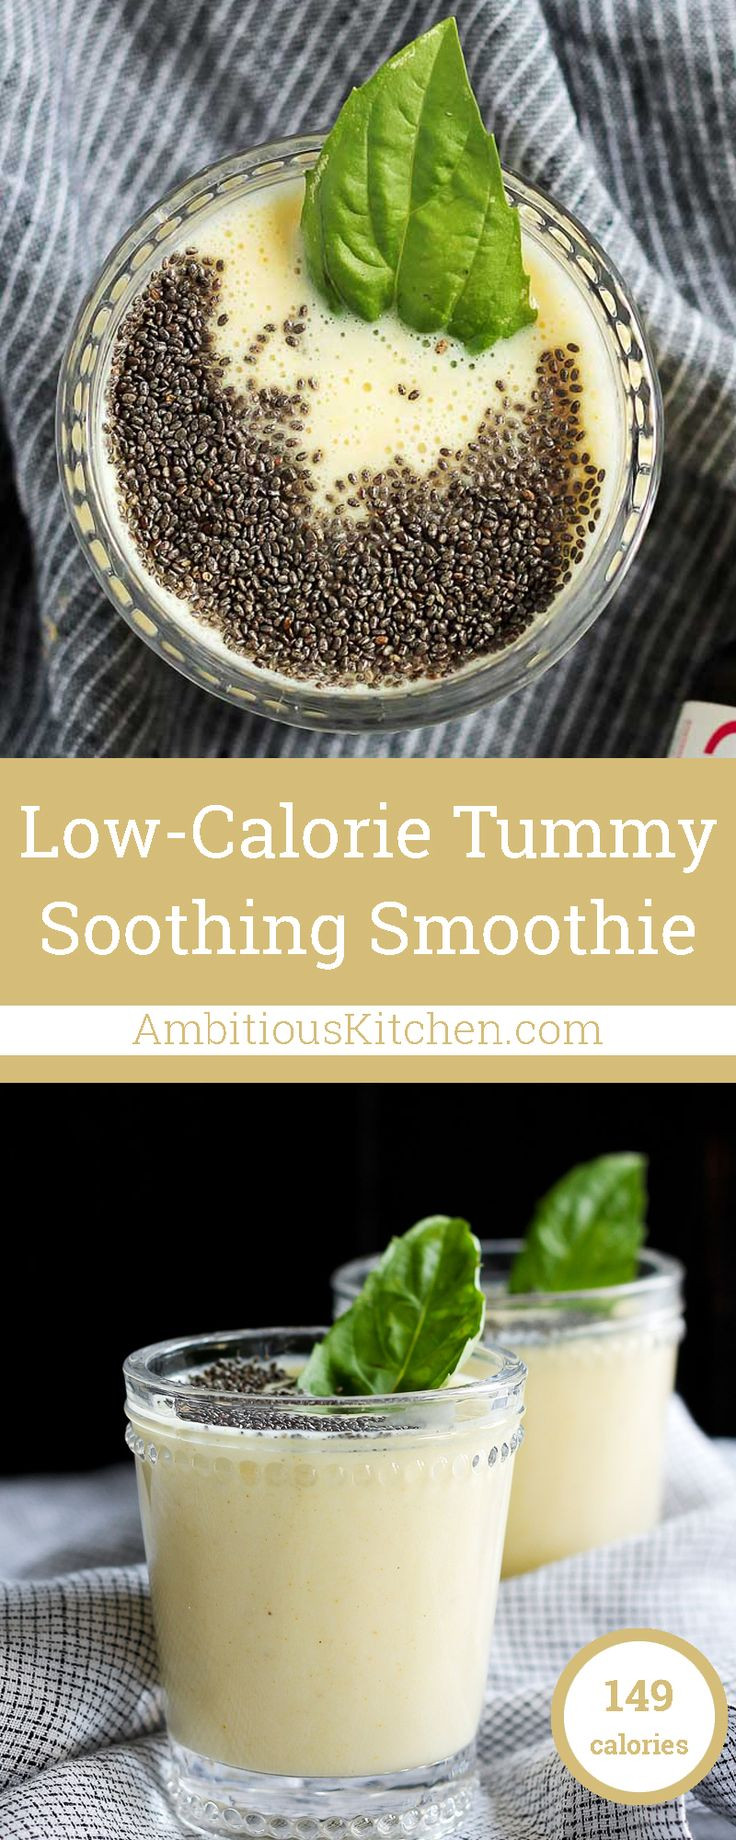 Low Calorie Smoothies Under 100 Calories
 100 Smoothie King Recipes on Pinterest